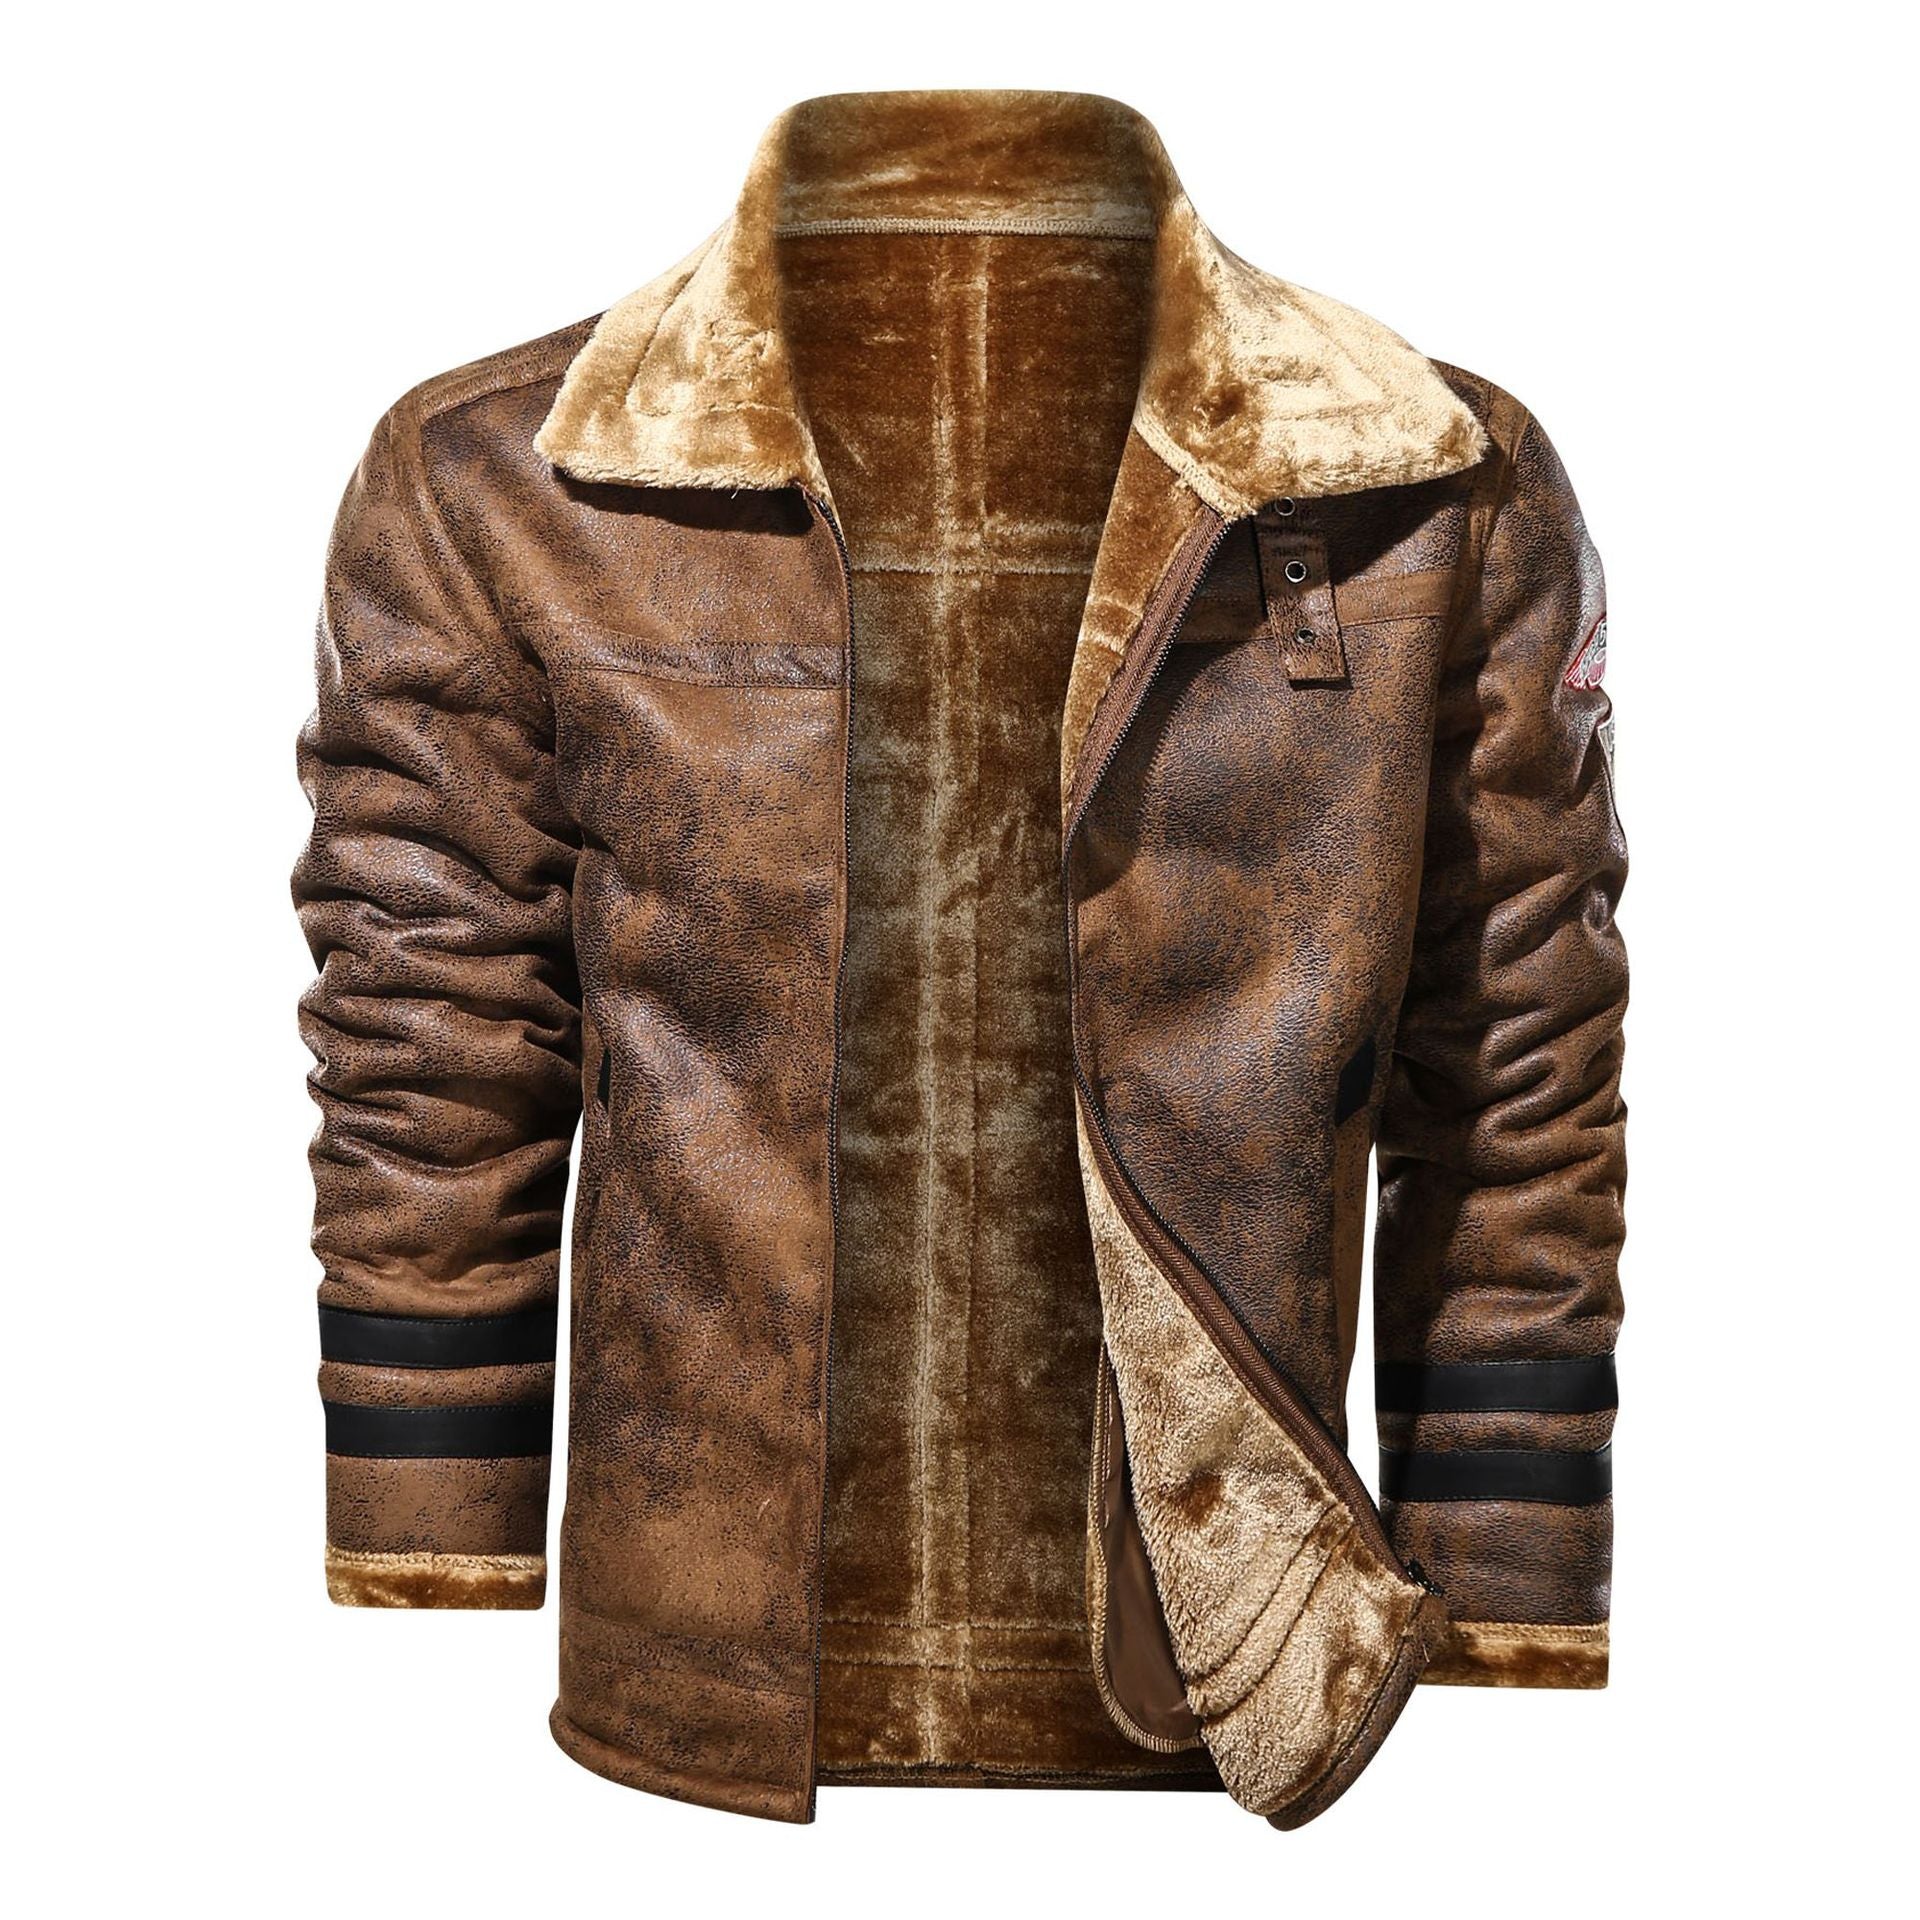 A Maramalive™ Faux Fur + Leather Motorcycle Retro Jacket: Vegan-Friendly Vintage Coat with a faux fur collar.